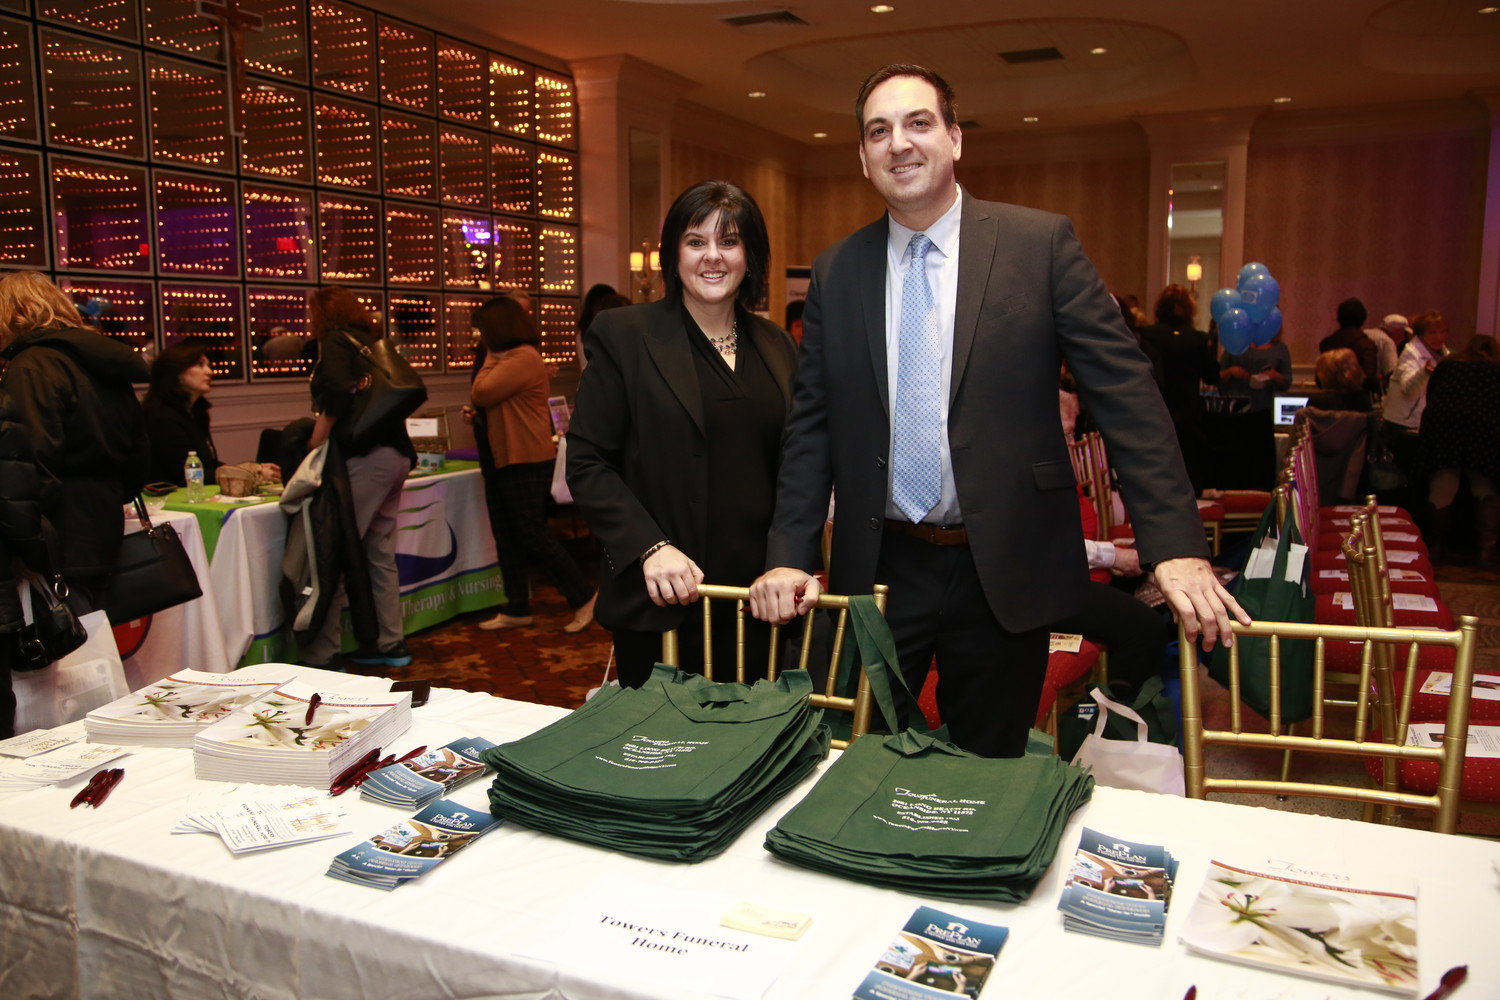 Amy Dagger with speaker George Frangiadakis from Towers Funeral Home.